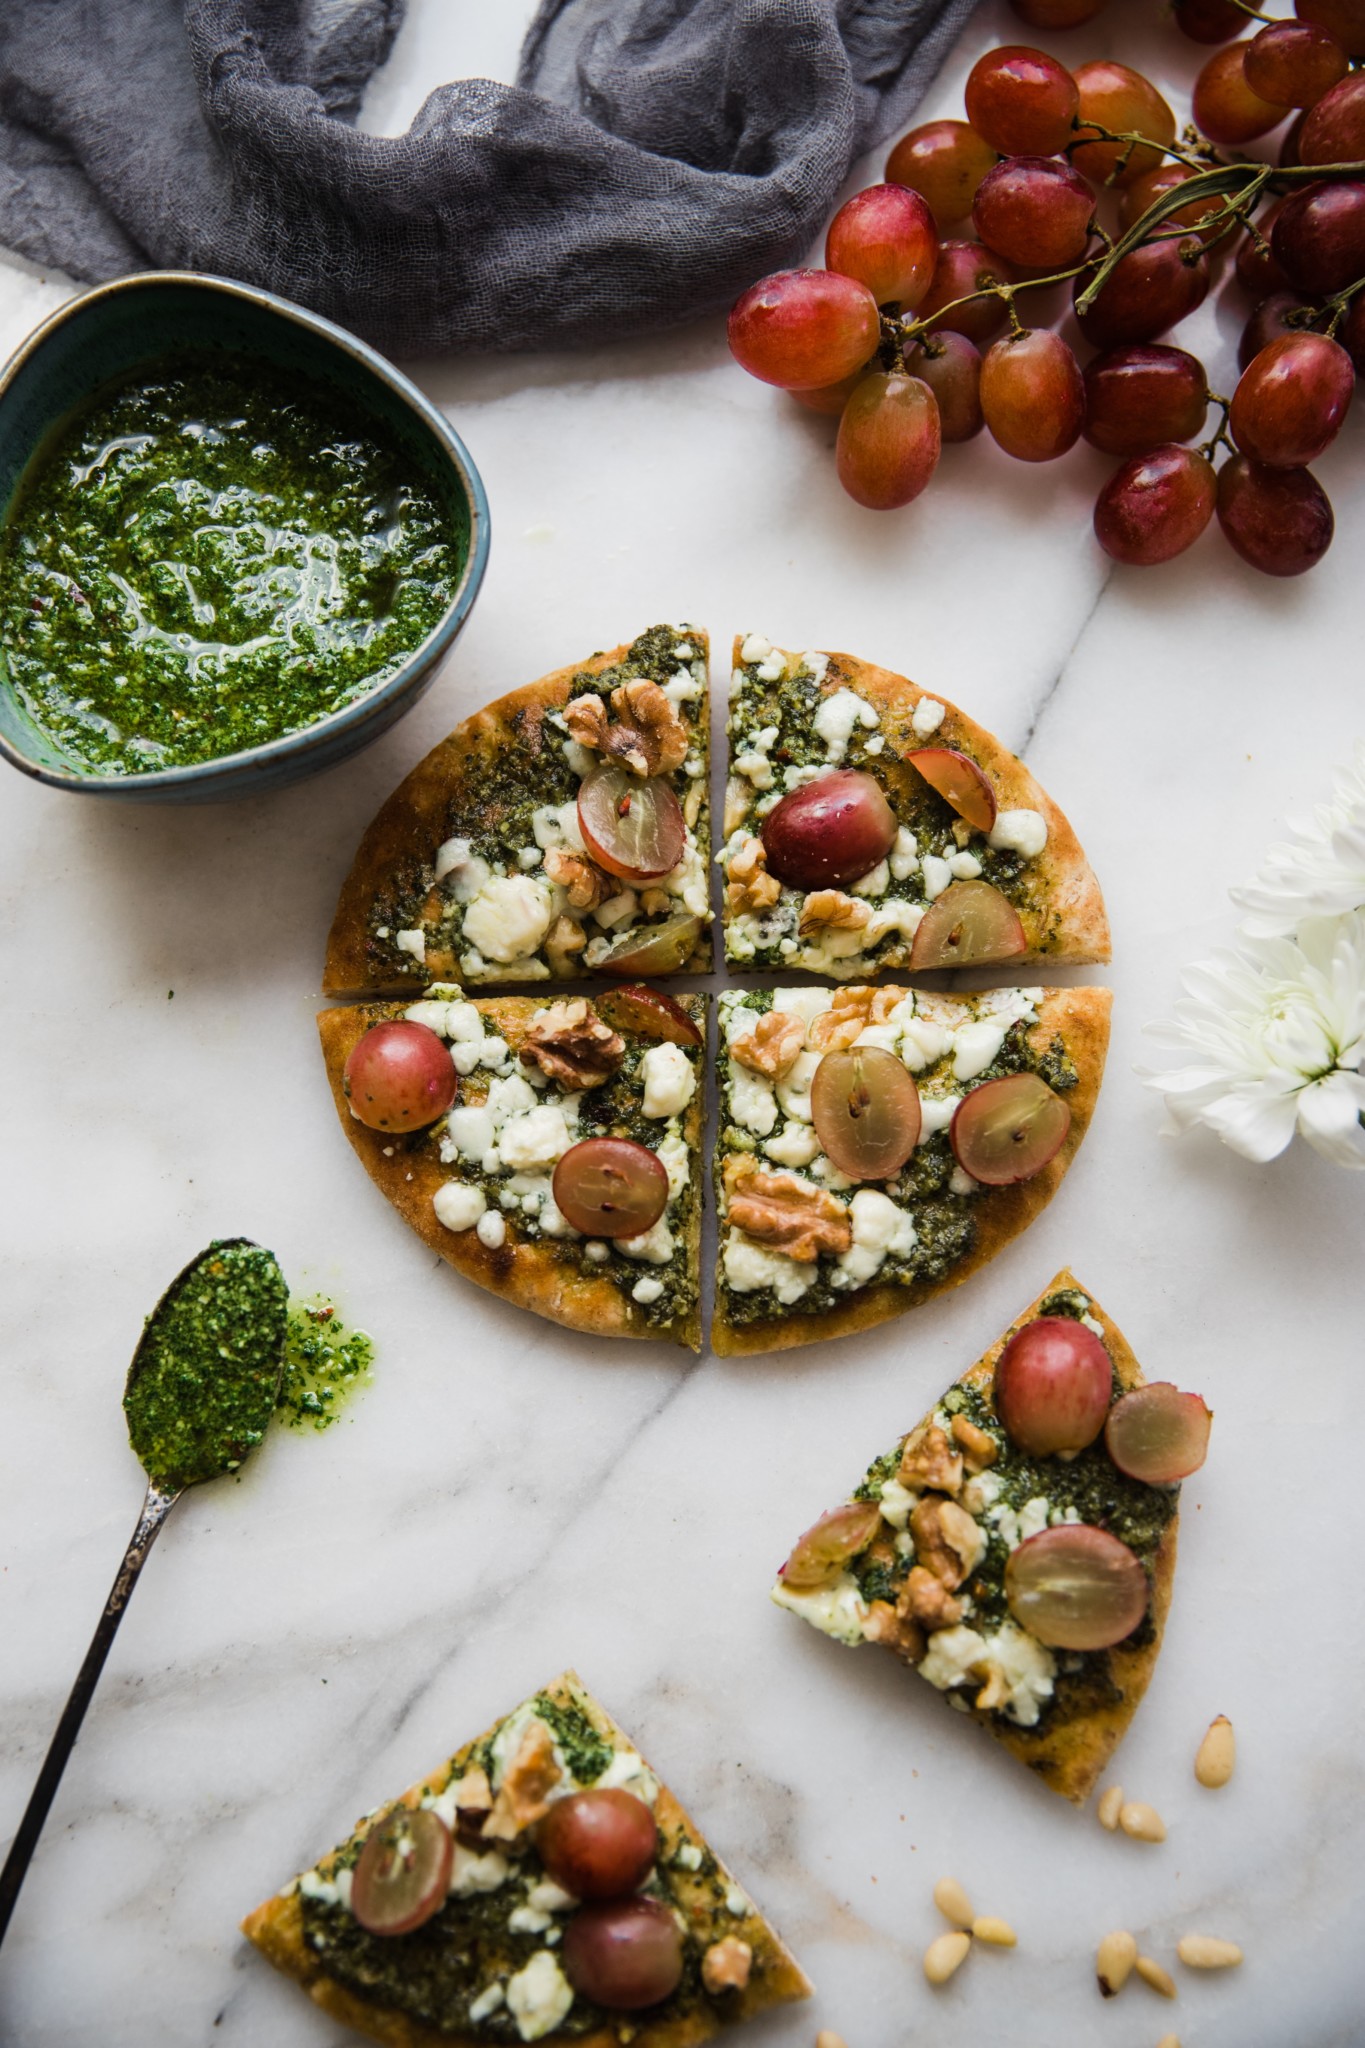 pita pizza made on pita bread with kale pesto, walnuts and red grapes